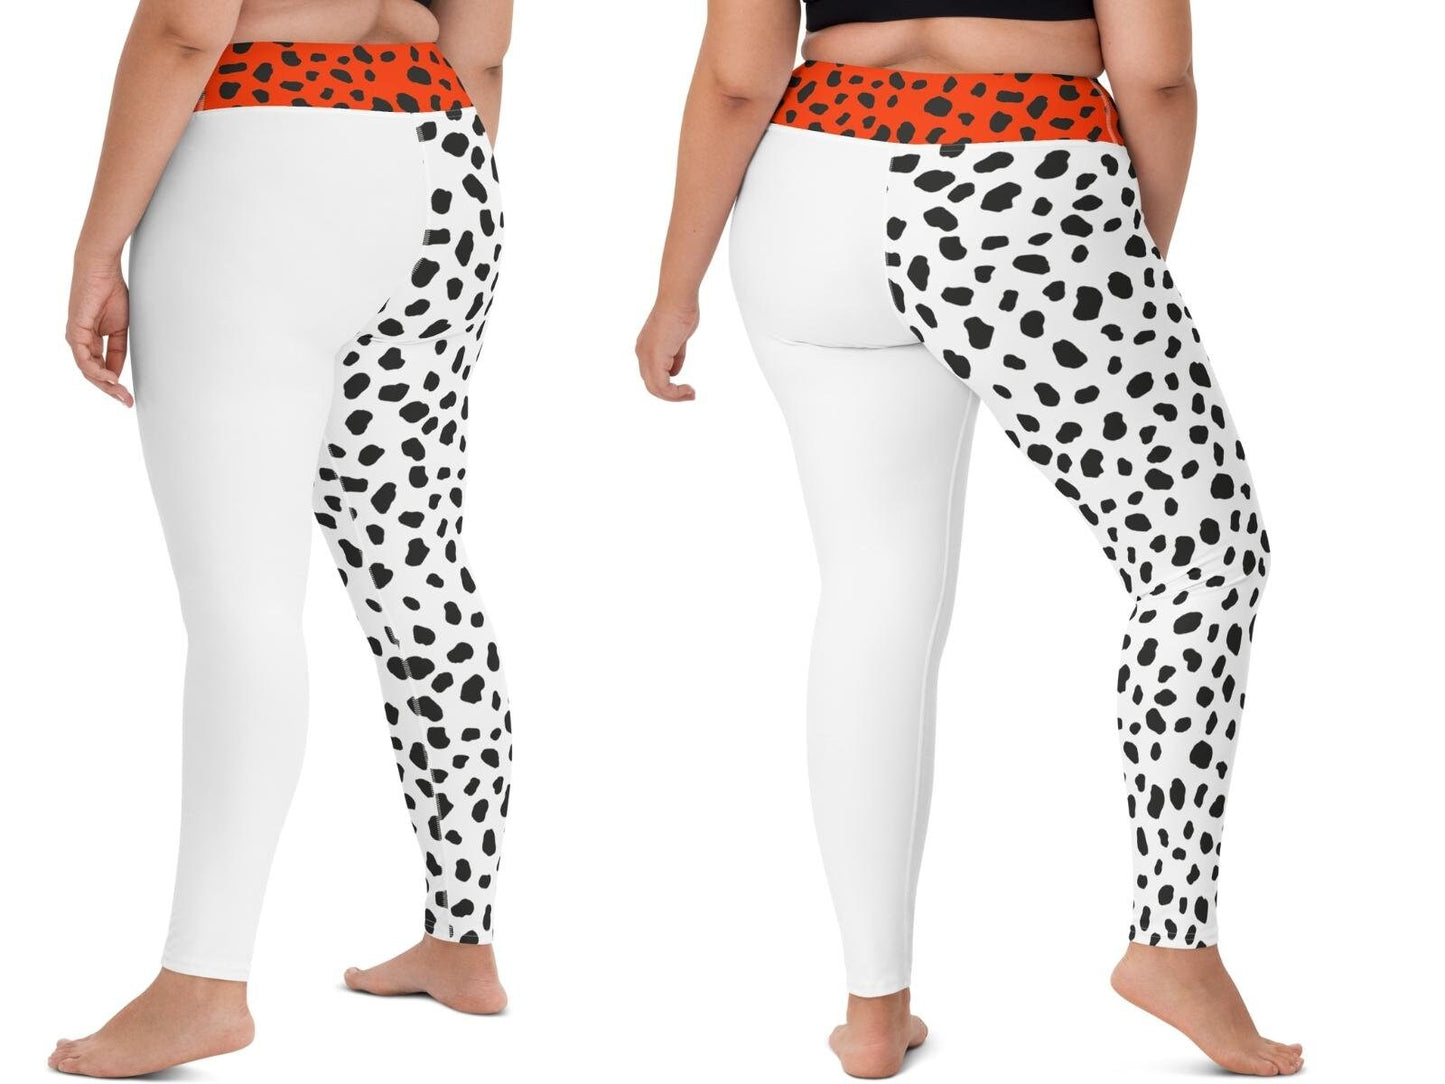 Cruel lady Inspired White and Spotted Yoga Leggings & Capris, Plus Size Yoga Leggings, Cosplay, Adult Halloween Costume, Gift for Her